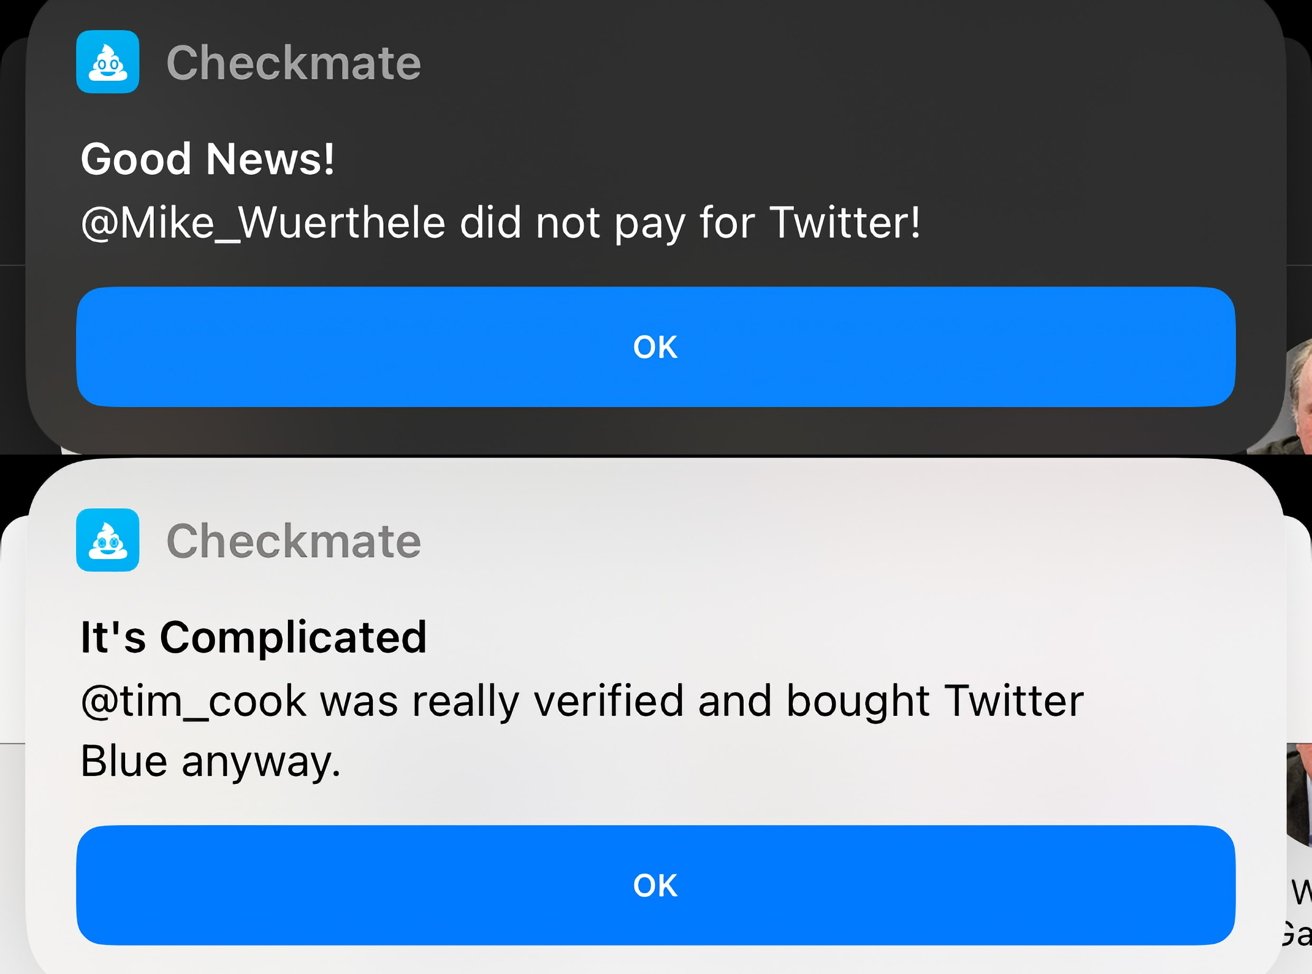 An example of how Checkmate reports Twitter checkmark statuses